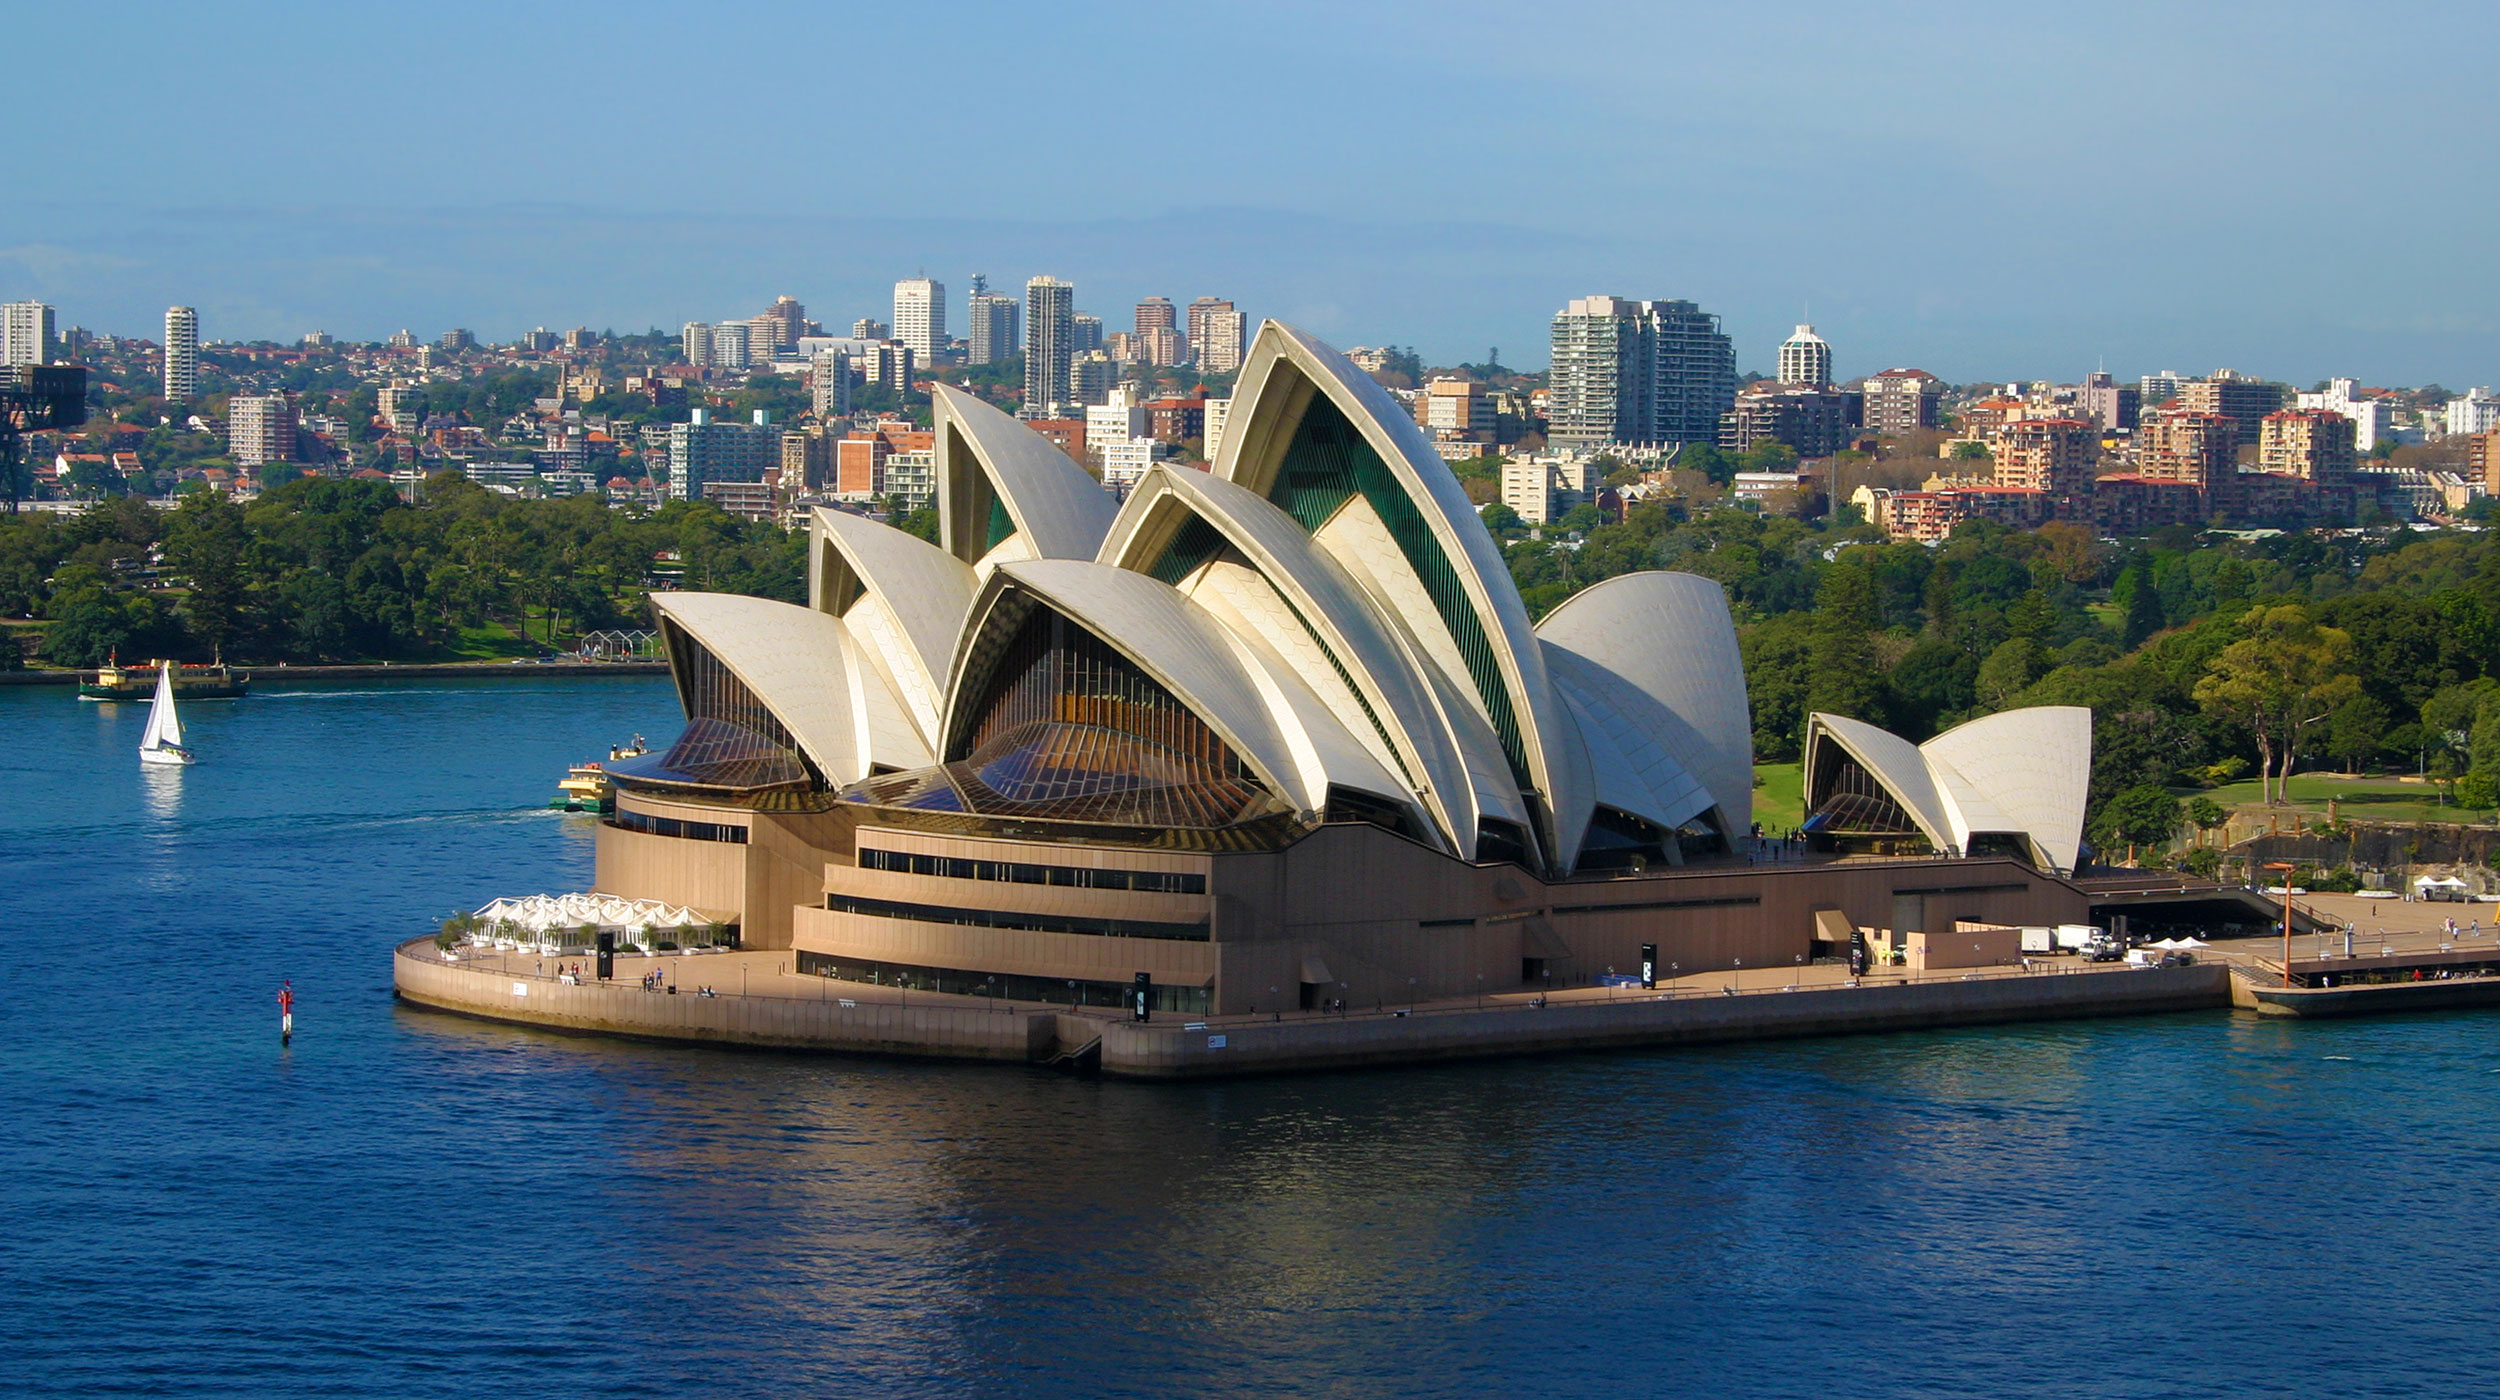 33 interesting facts about Australia